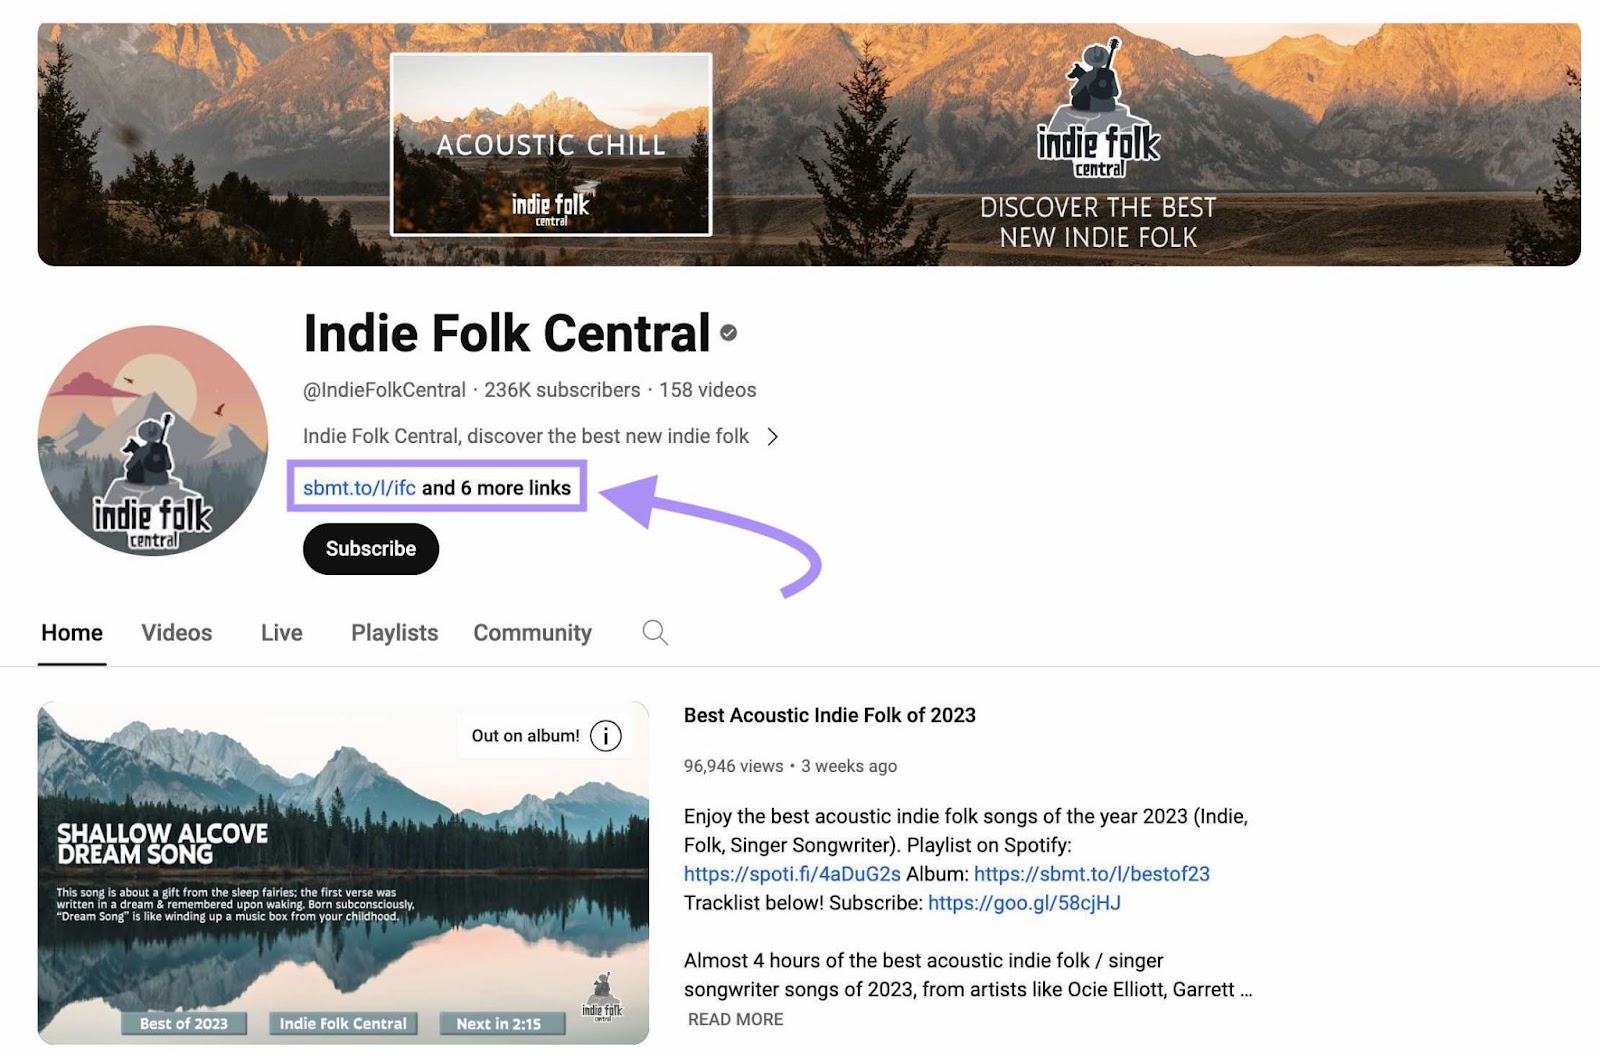 YouTube illustration   nexus  beneath  the banner of "Indie Folk Central" YouTube transmission  page